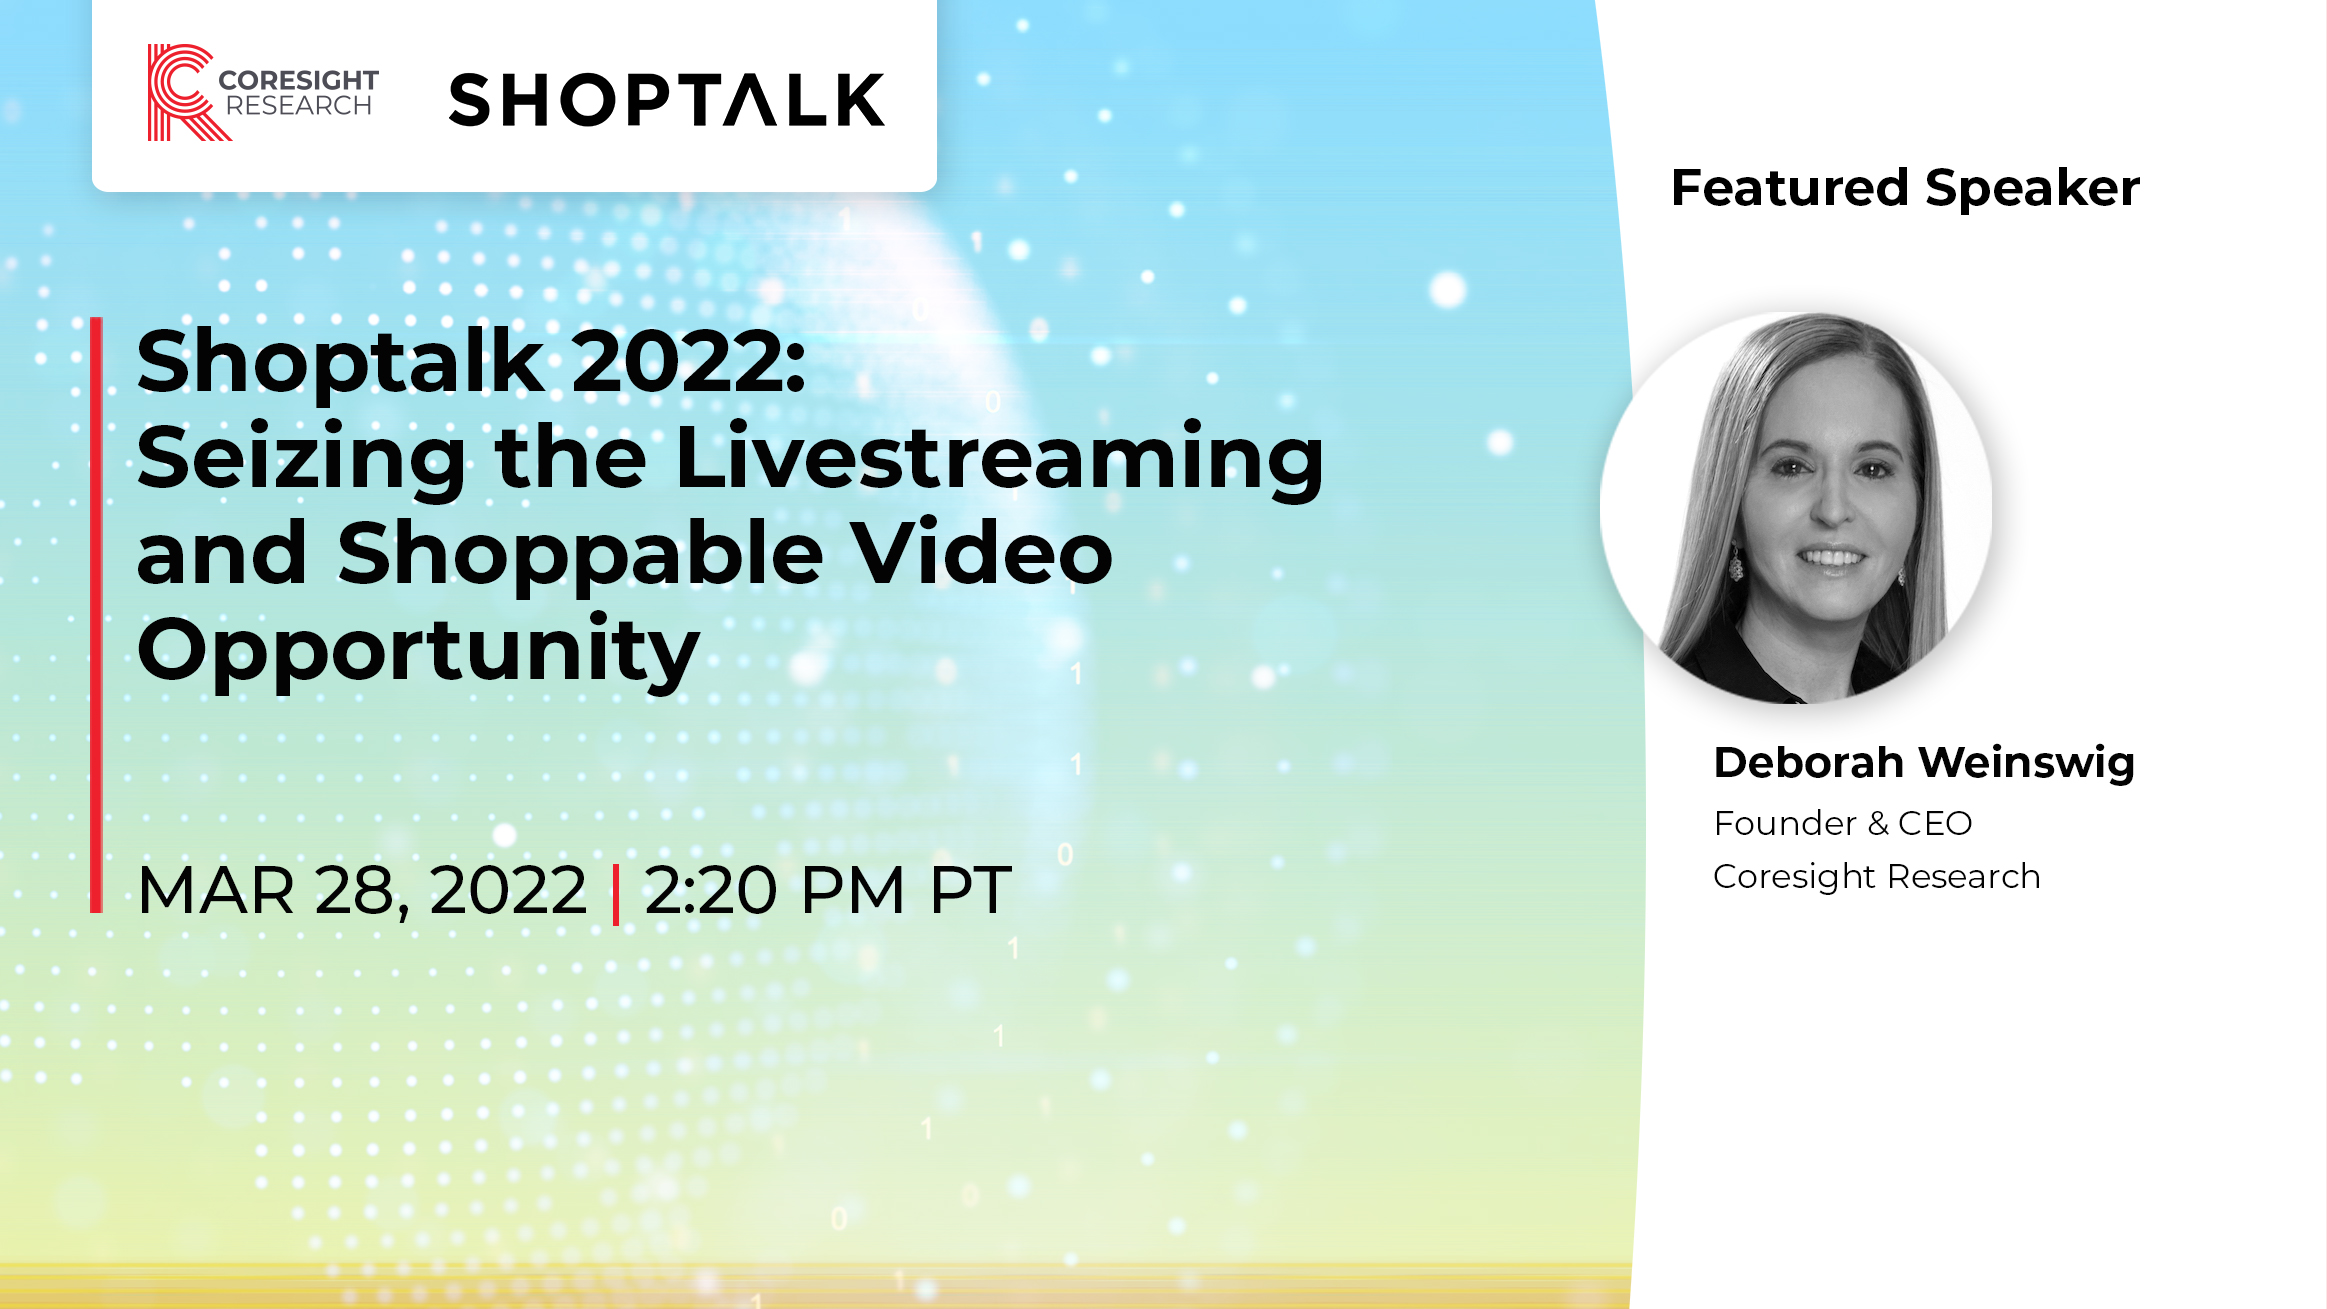 Shoptalk 2022 Seizing the Livestreaming and Shoppable Video